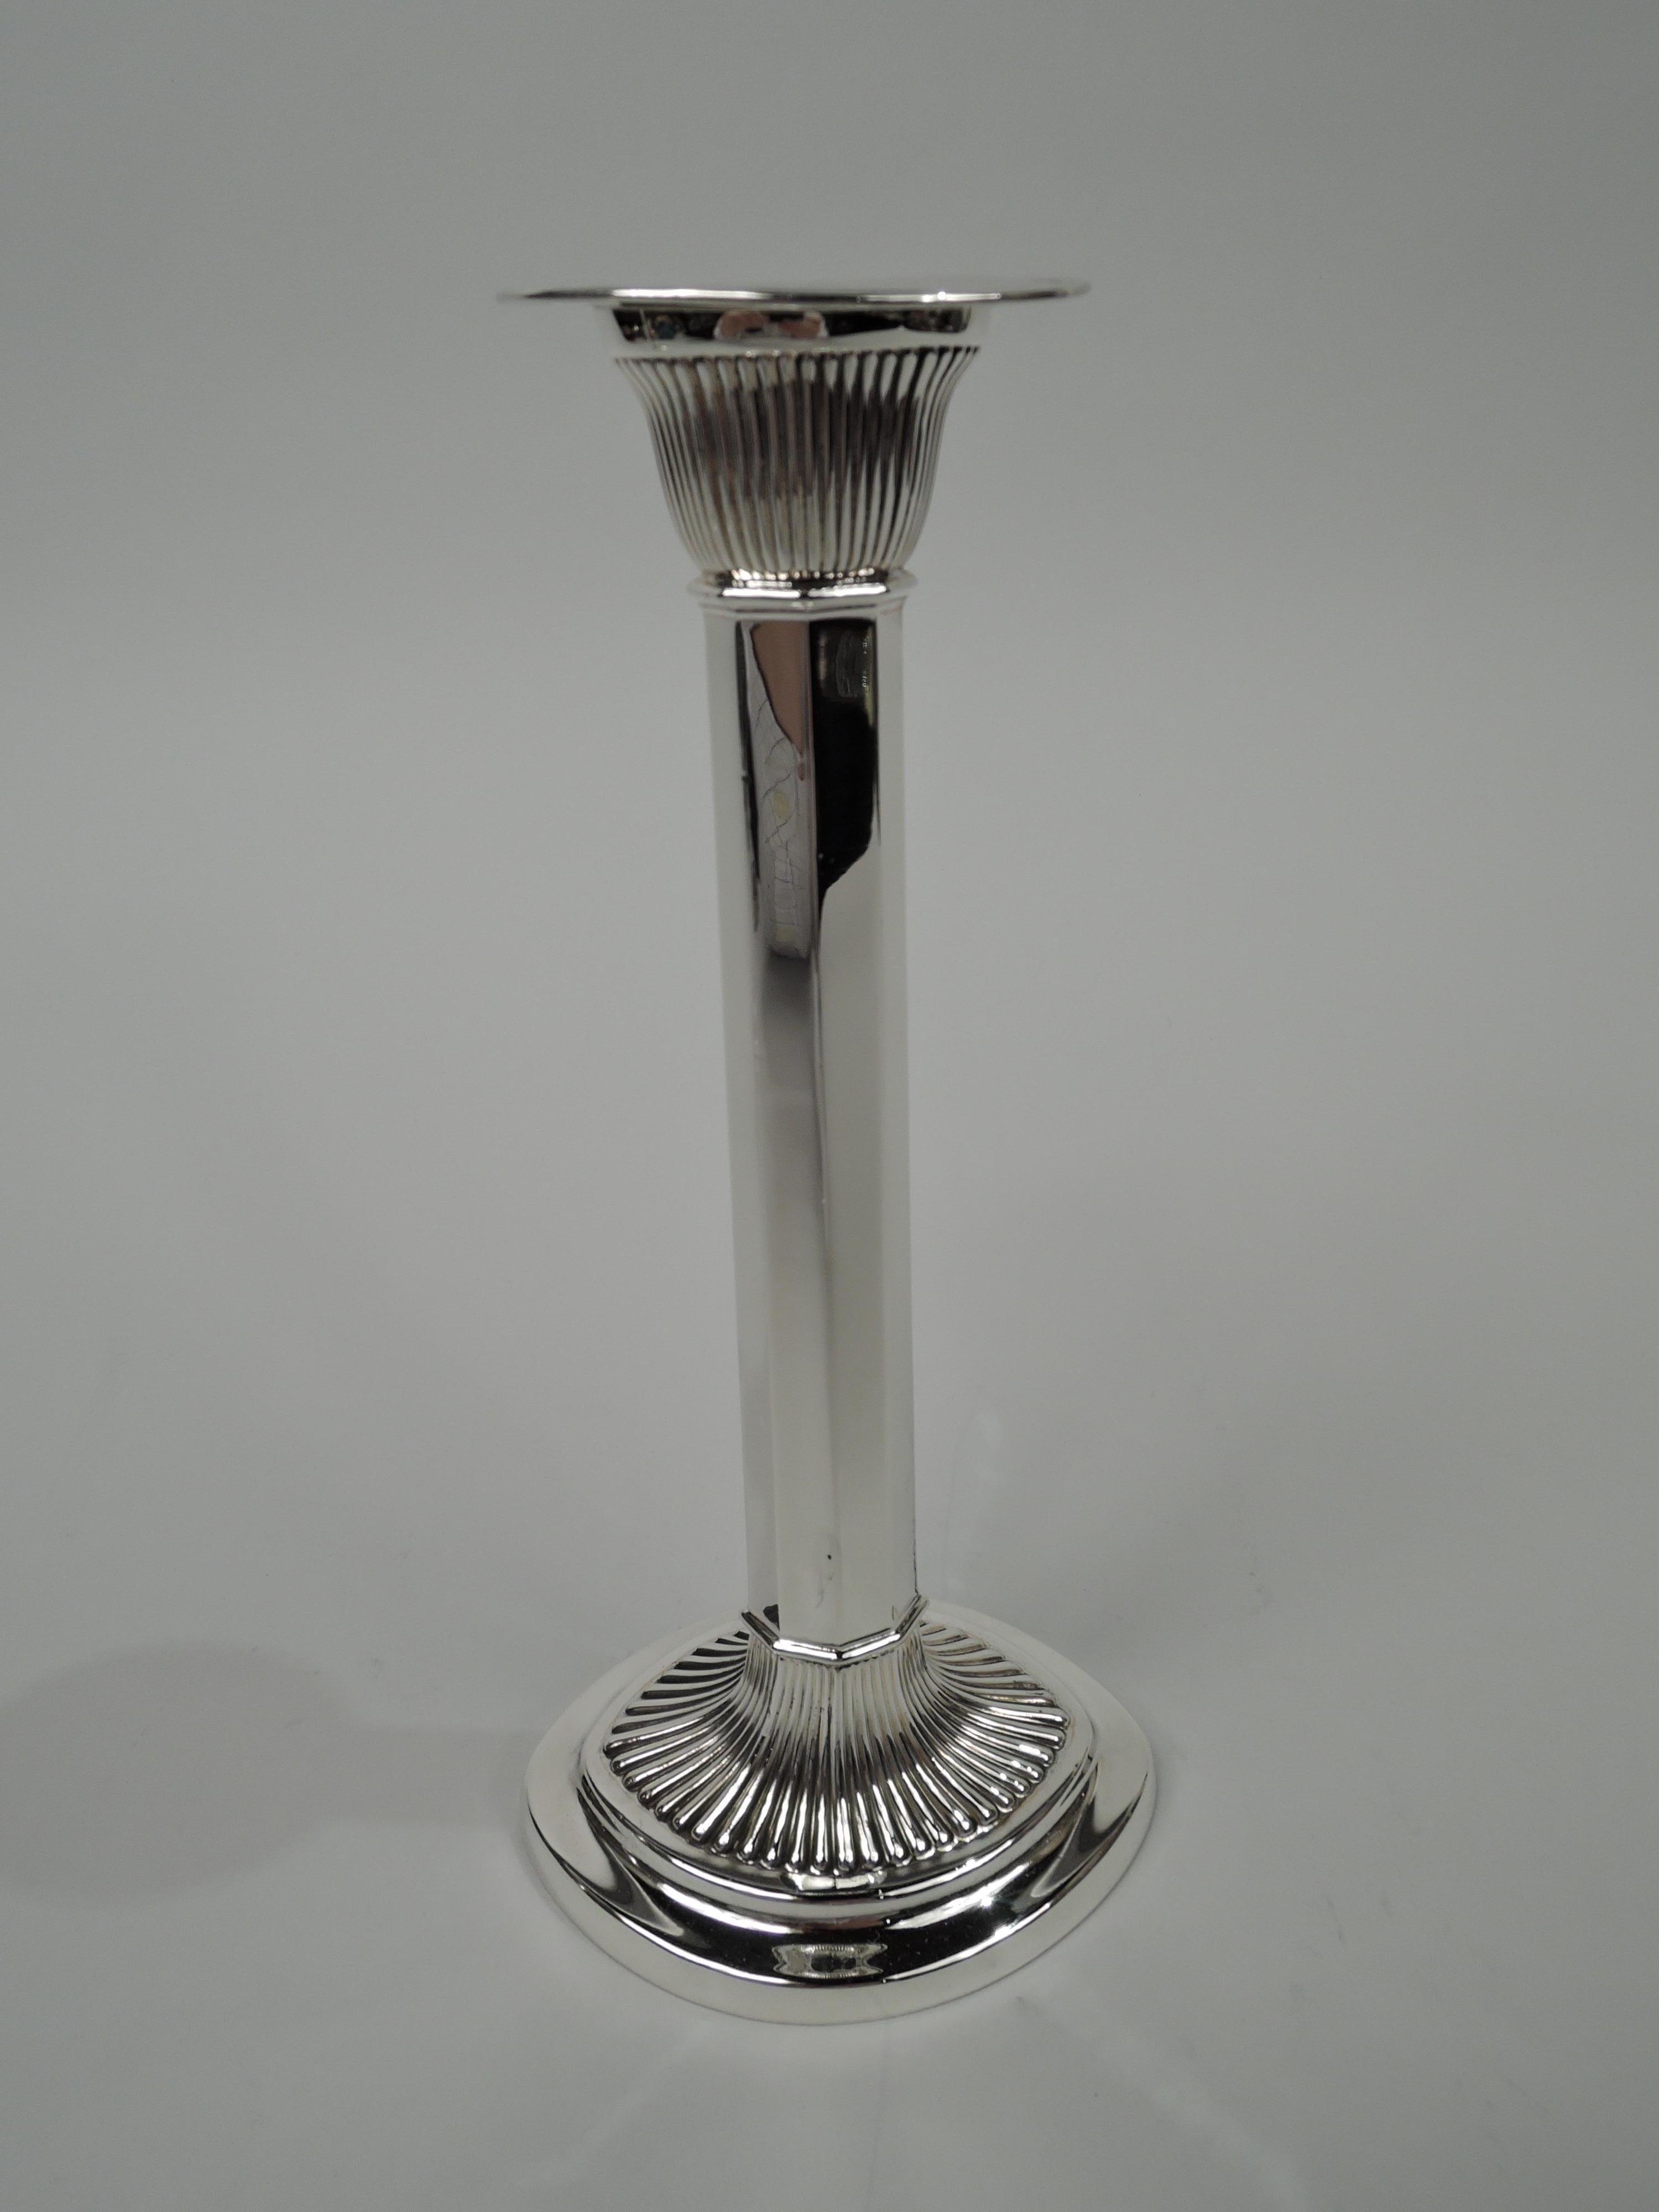 Pair of Edwardian Modern sterling silver candlesticks. Made by Gorham in Providence in 1905. Ovoid with faceted upward tapering haft on raised foot. Socket tapering with detachable bobeche. Dramatic ribbing on socket and foot. Fully marked including